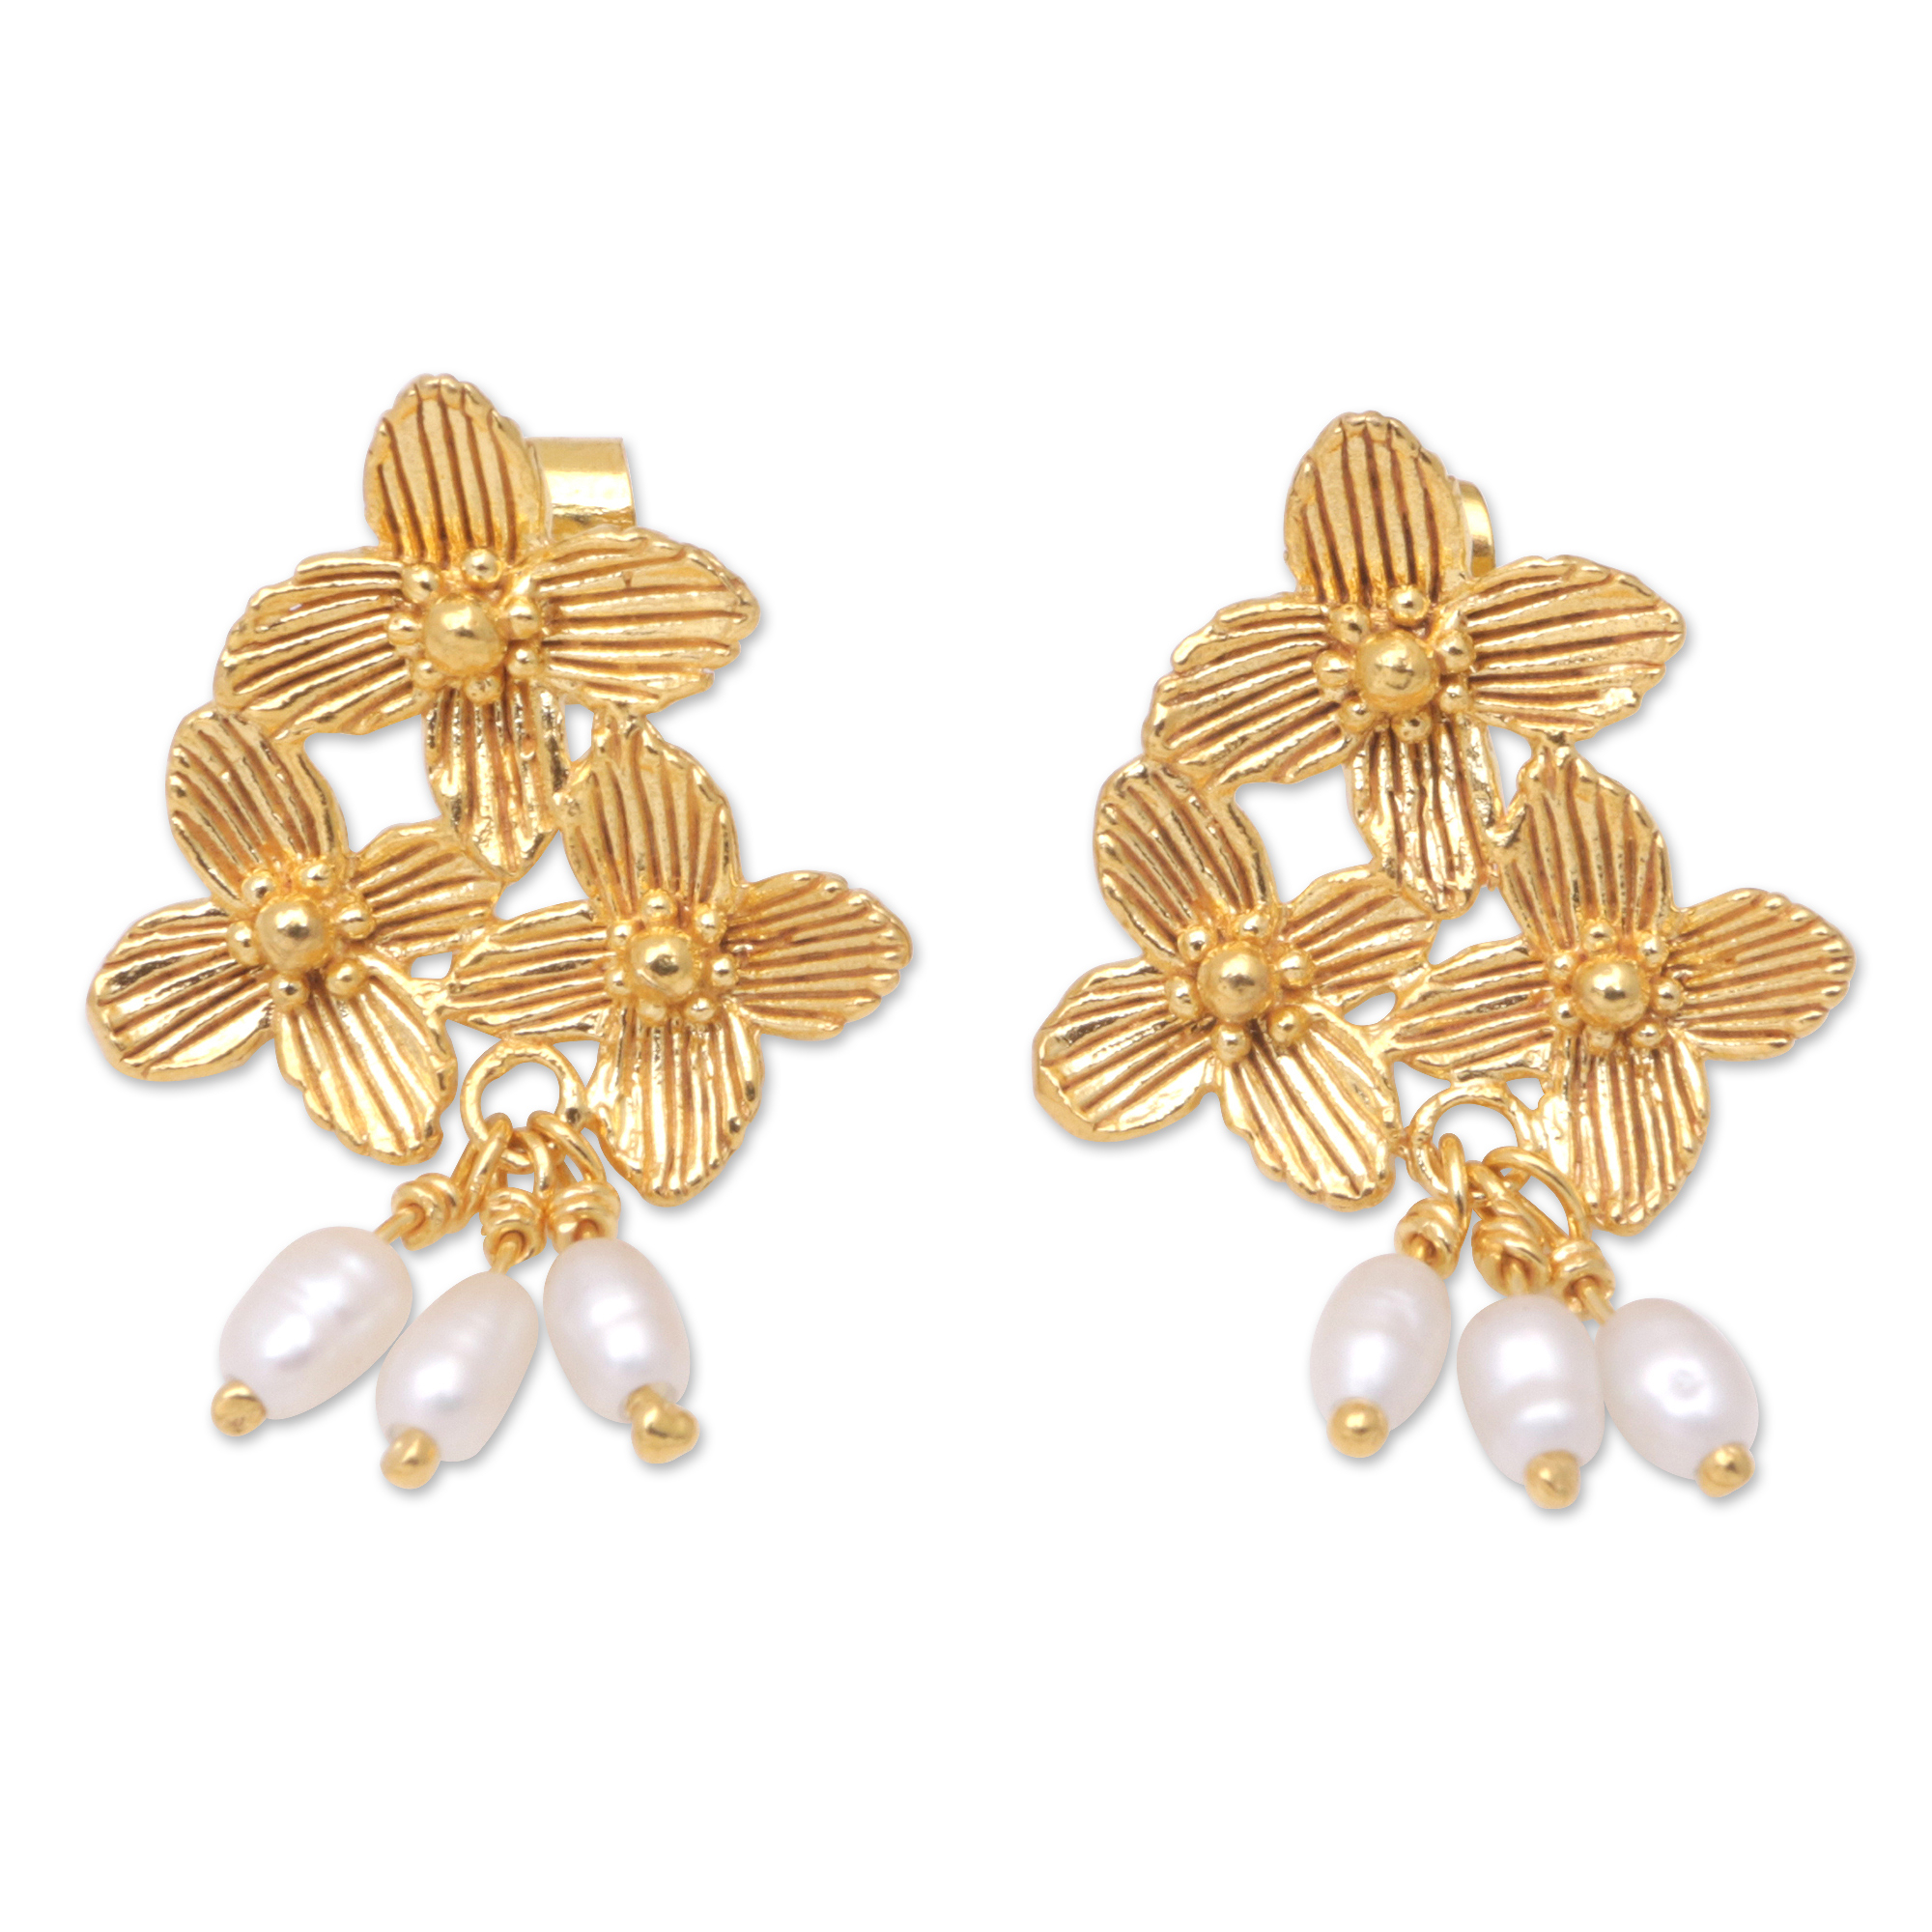 22k Gold-Plated Dangle Earrings with Cultured Pearls - Blooming Trinity ...